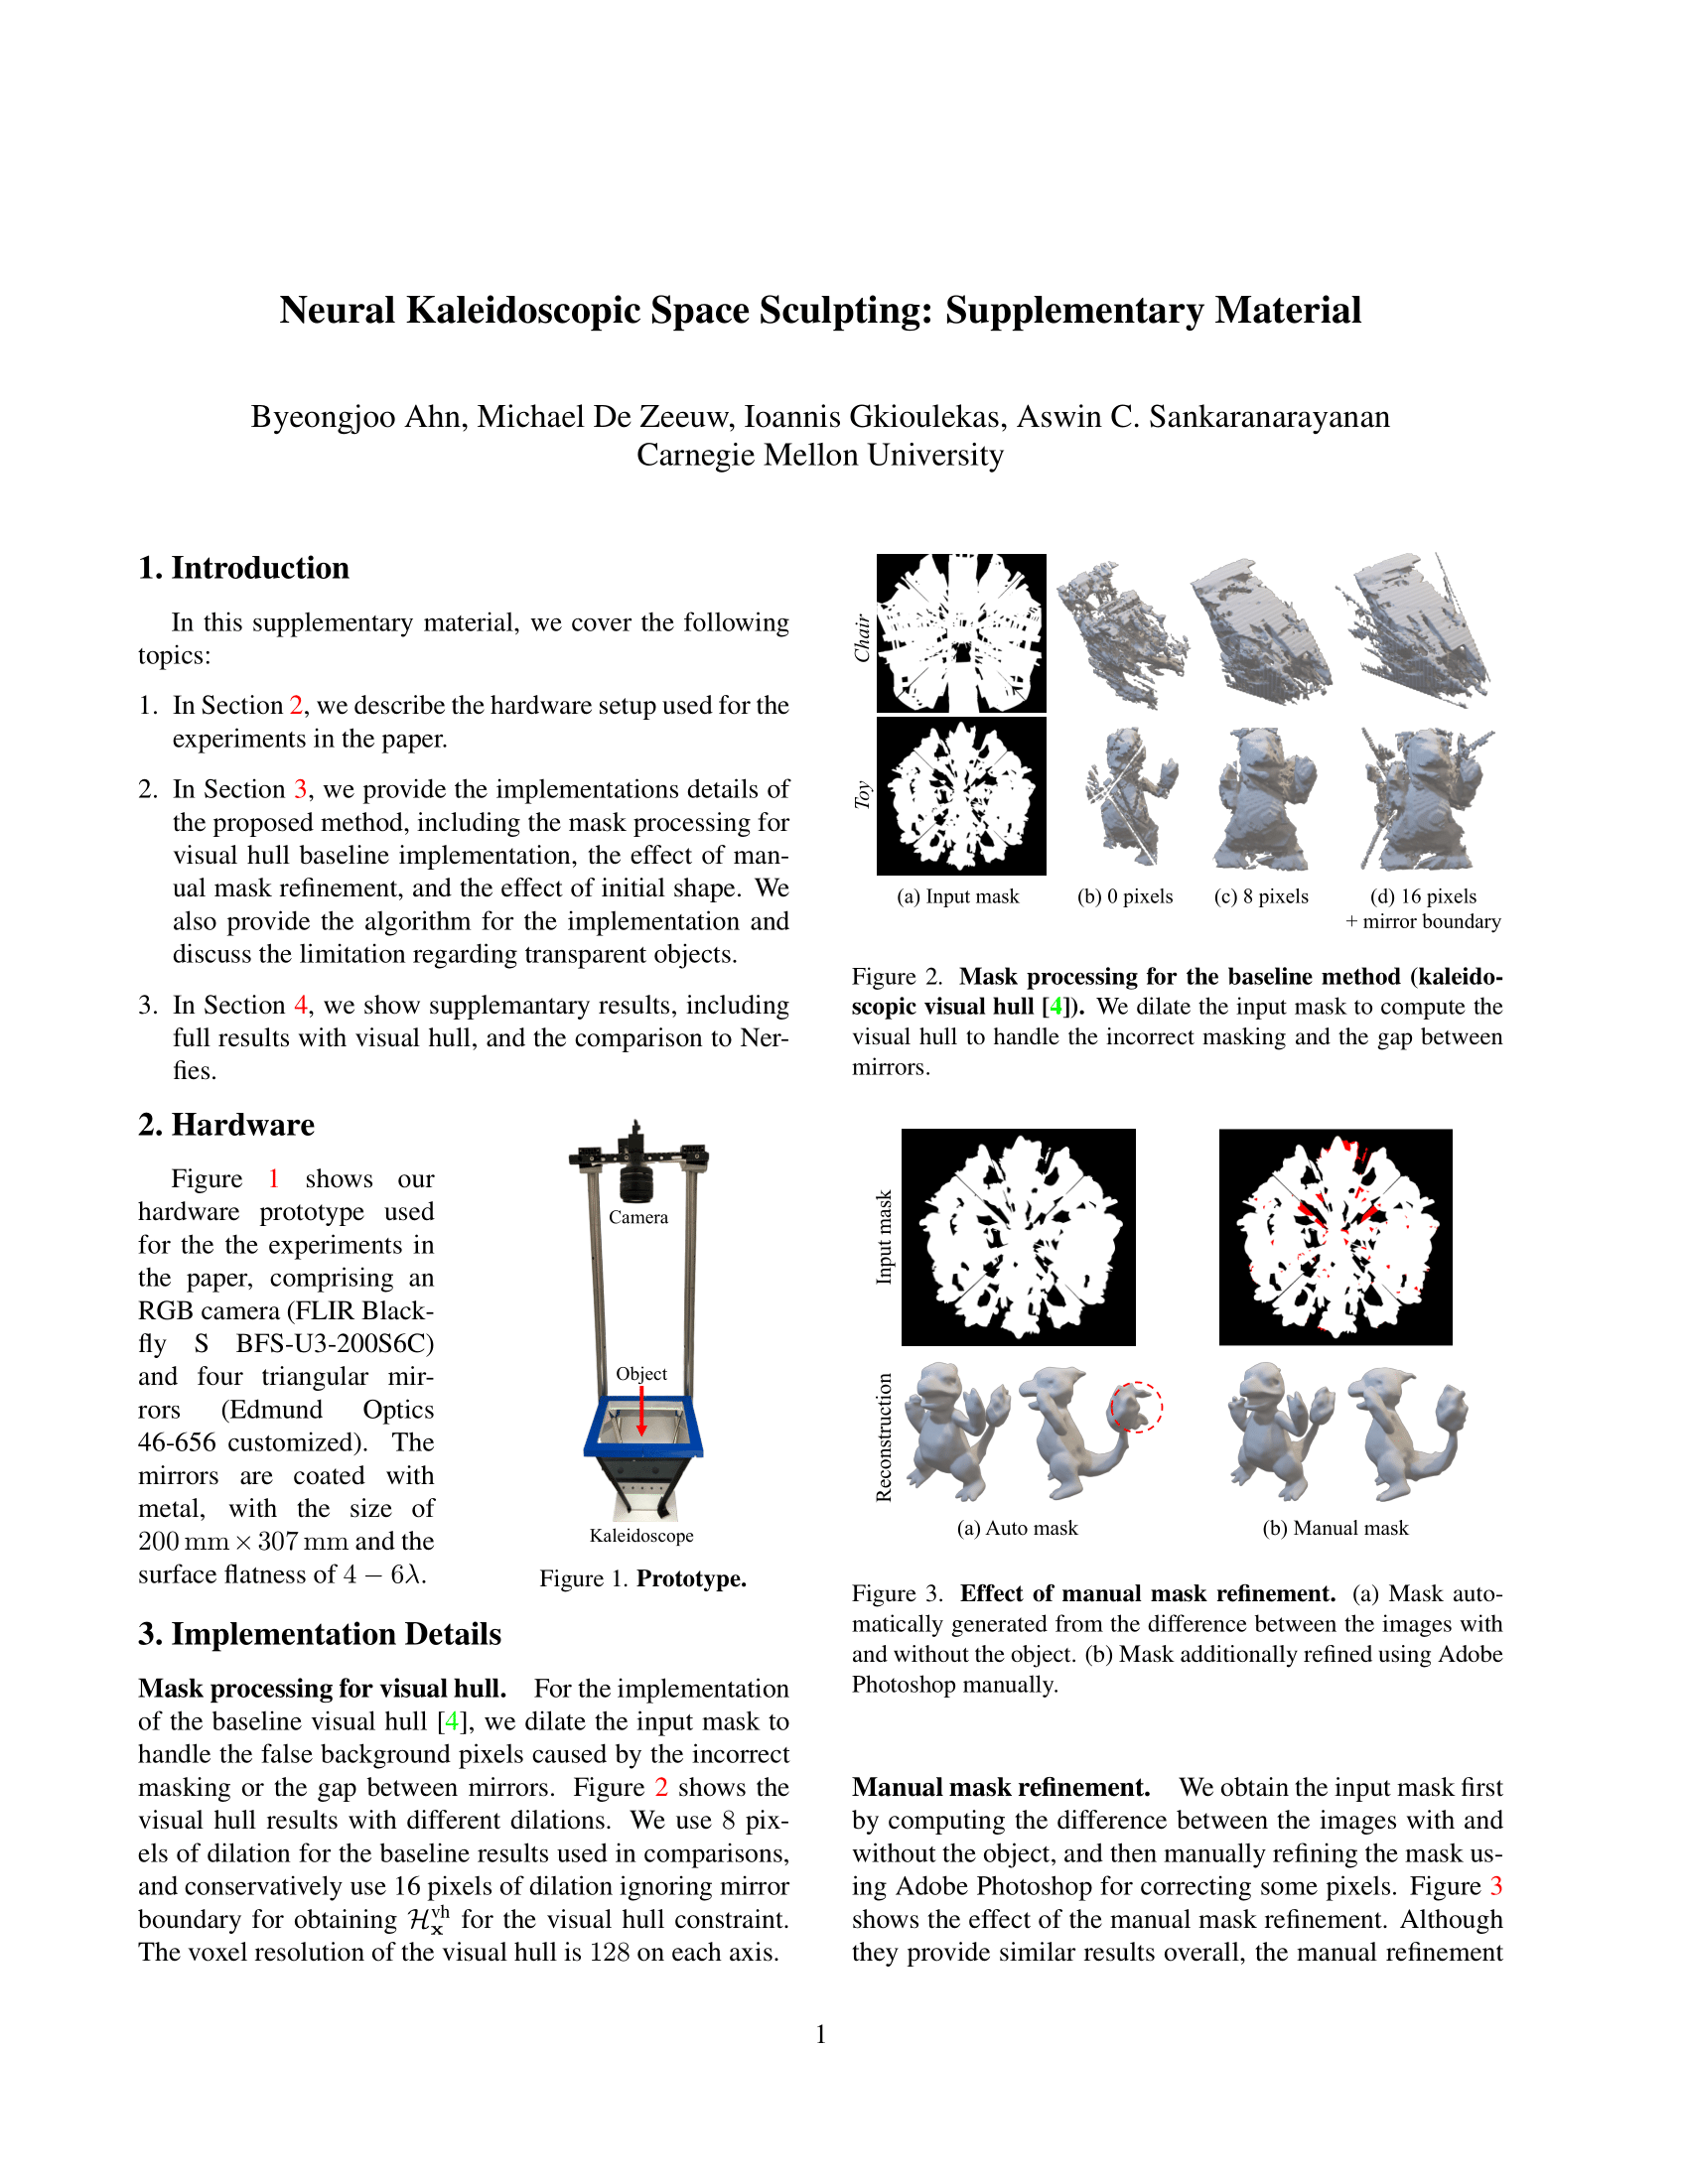 Link to supplemental material